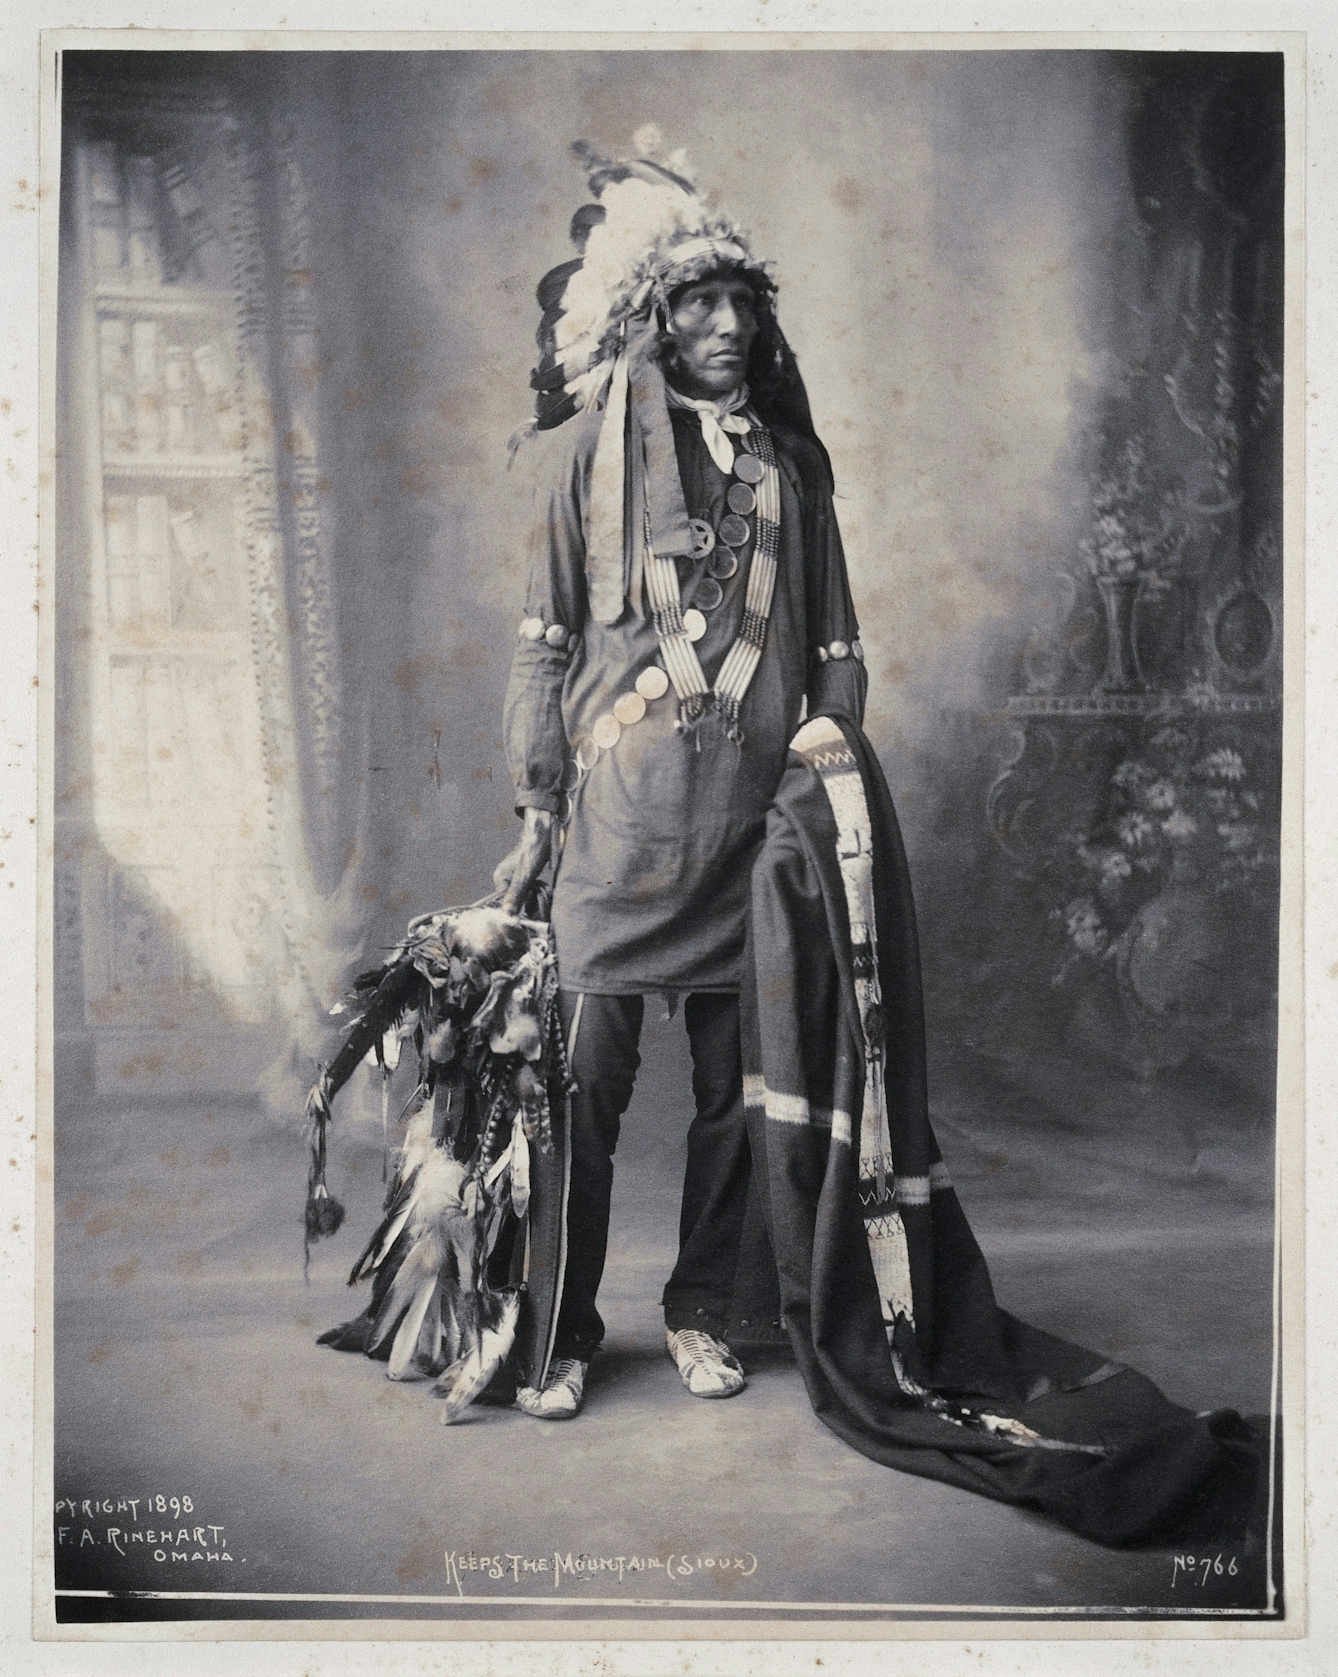 Portrait of Keeps the Mountain, a Sioux Indian